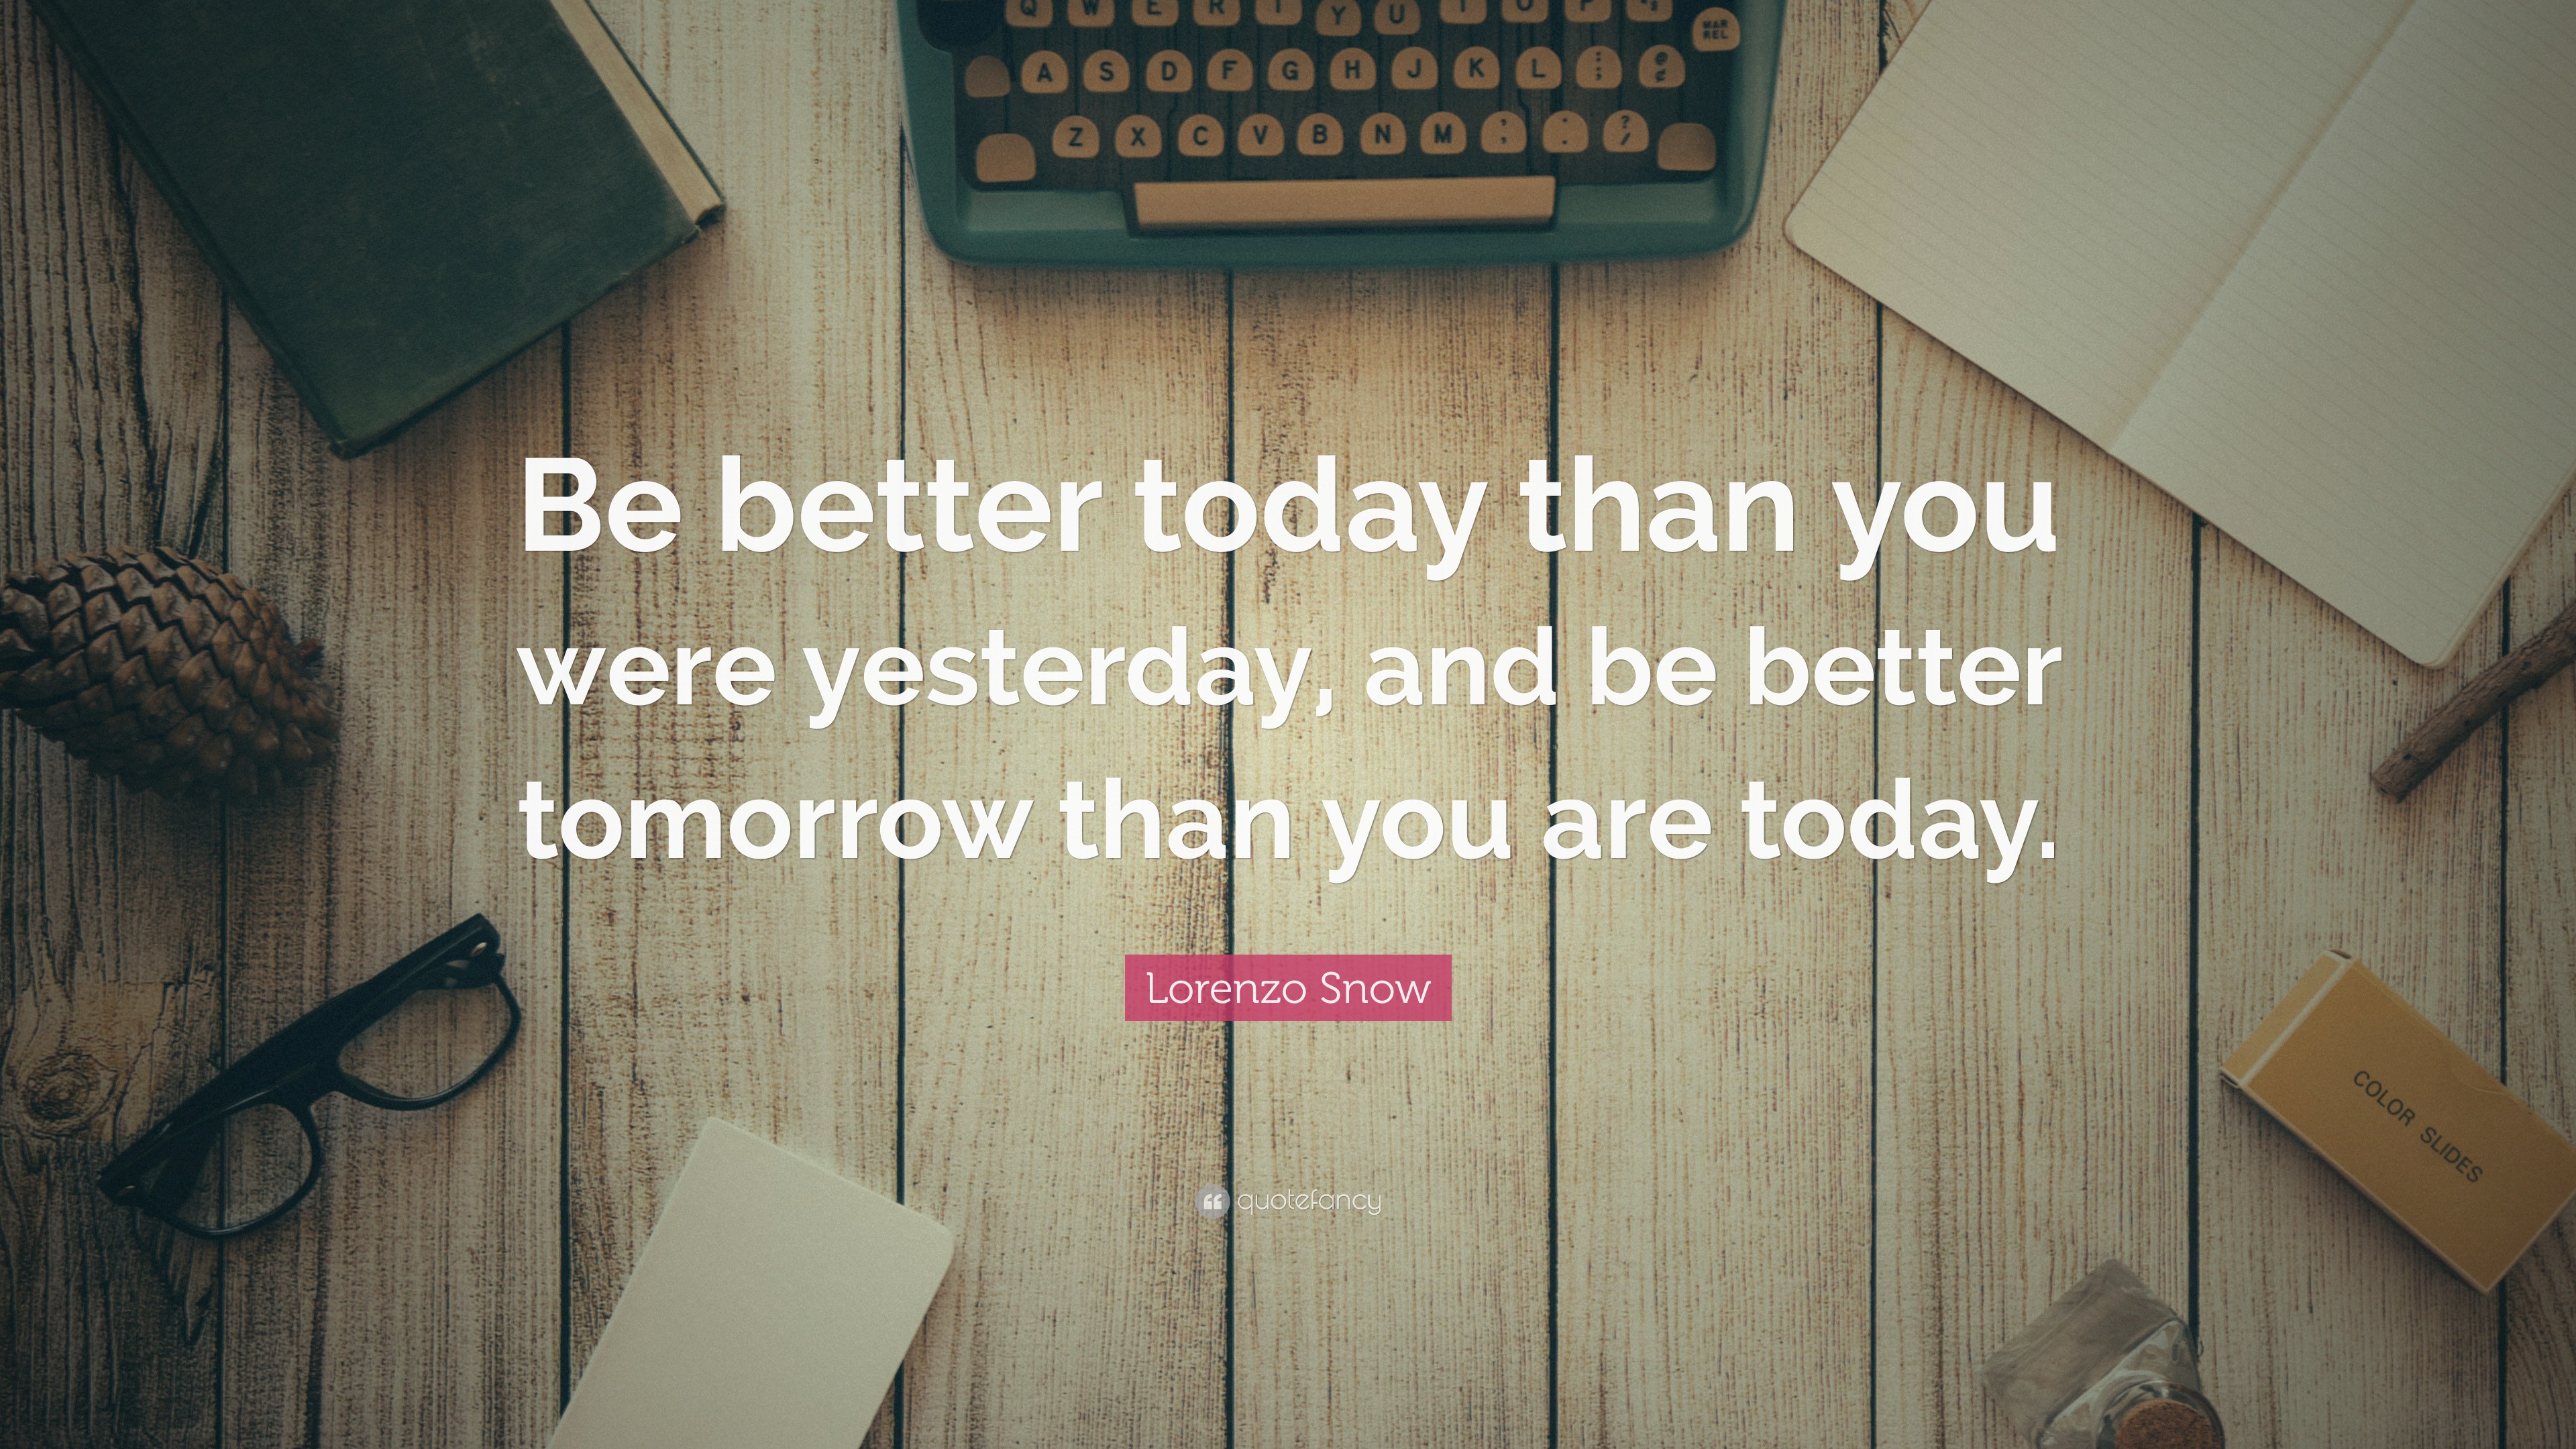 Lorenzo Snow Quote: “Be better today than you were yesterday, and be